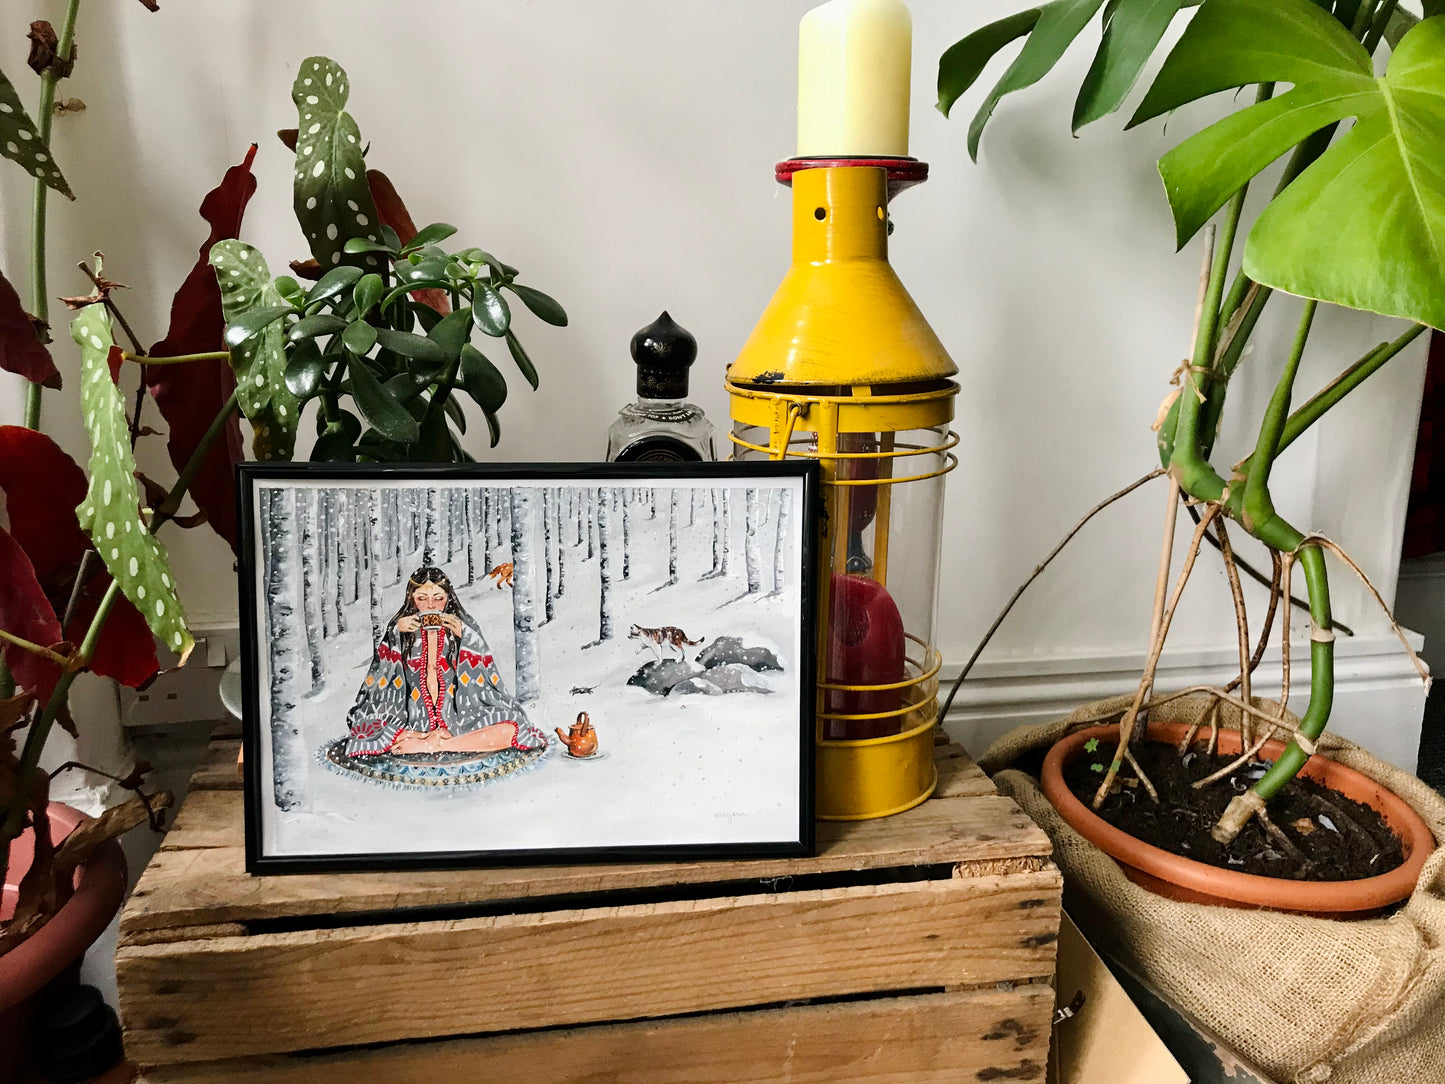 Forest Magick , Wintery forest Christmas snowy landscape original gouache painting print of a woman drinking tea in the forest with animals